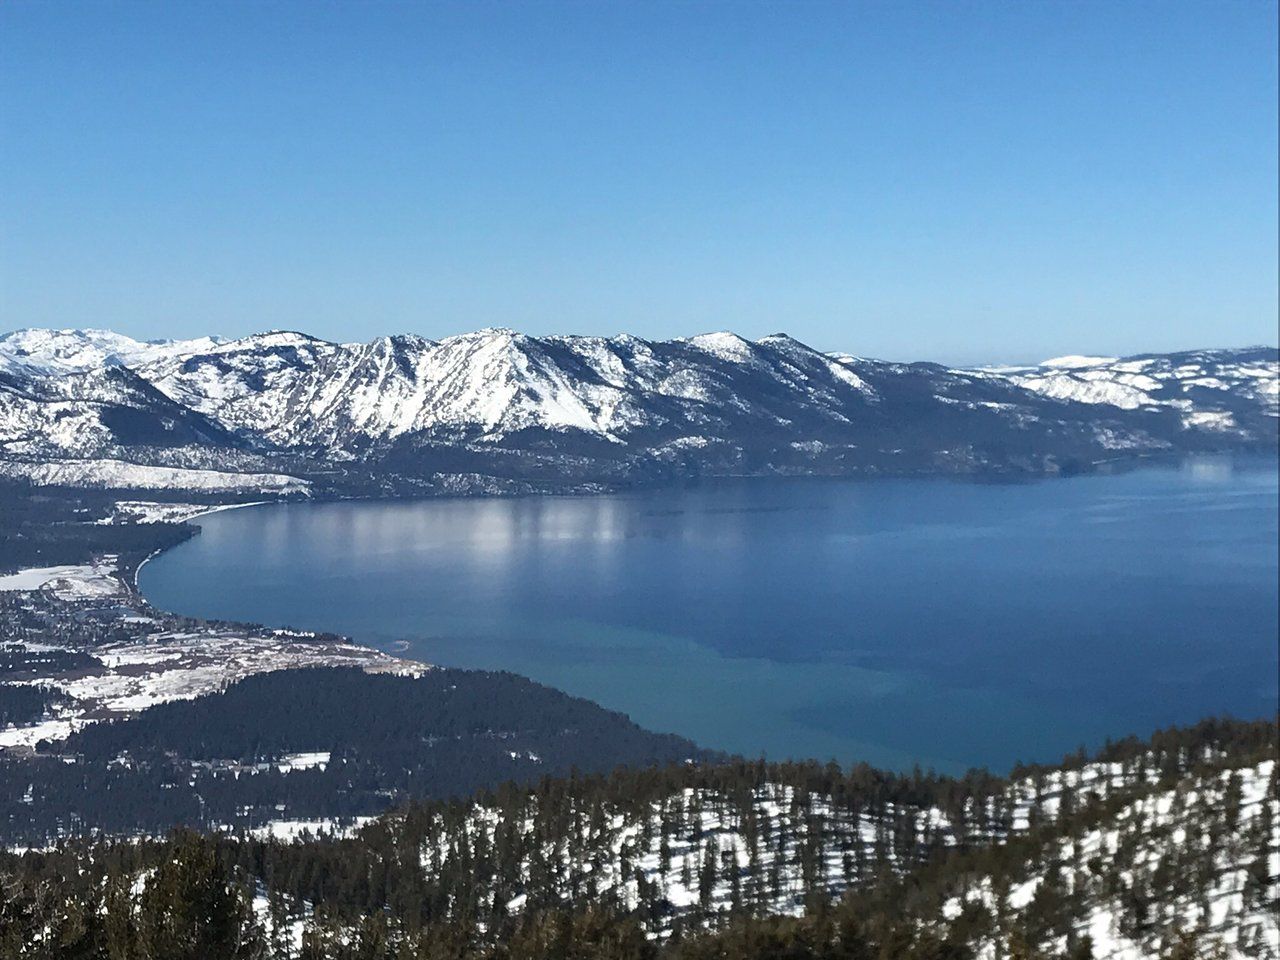 Experience Bliss On The Slopes: Heavenly Mountain Resort, Lake Tahoe